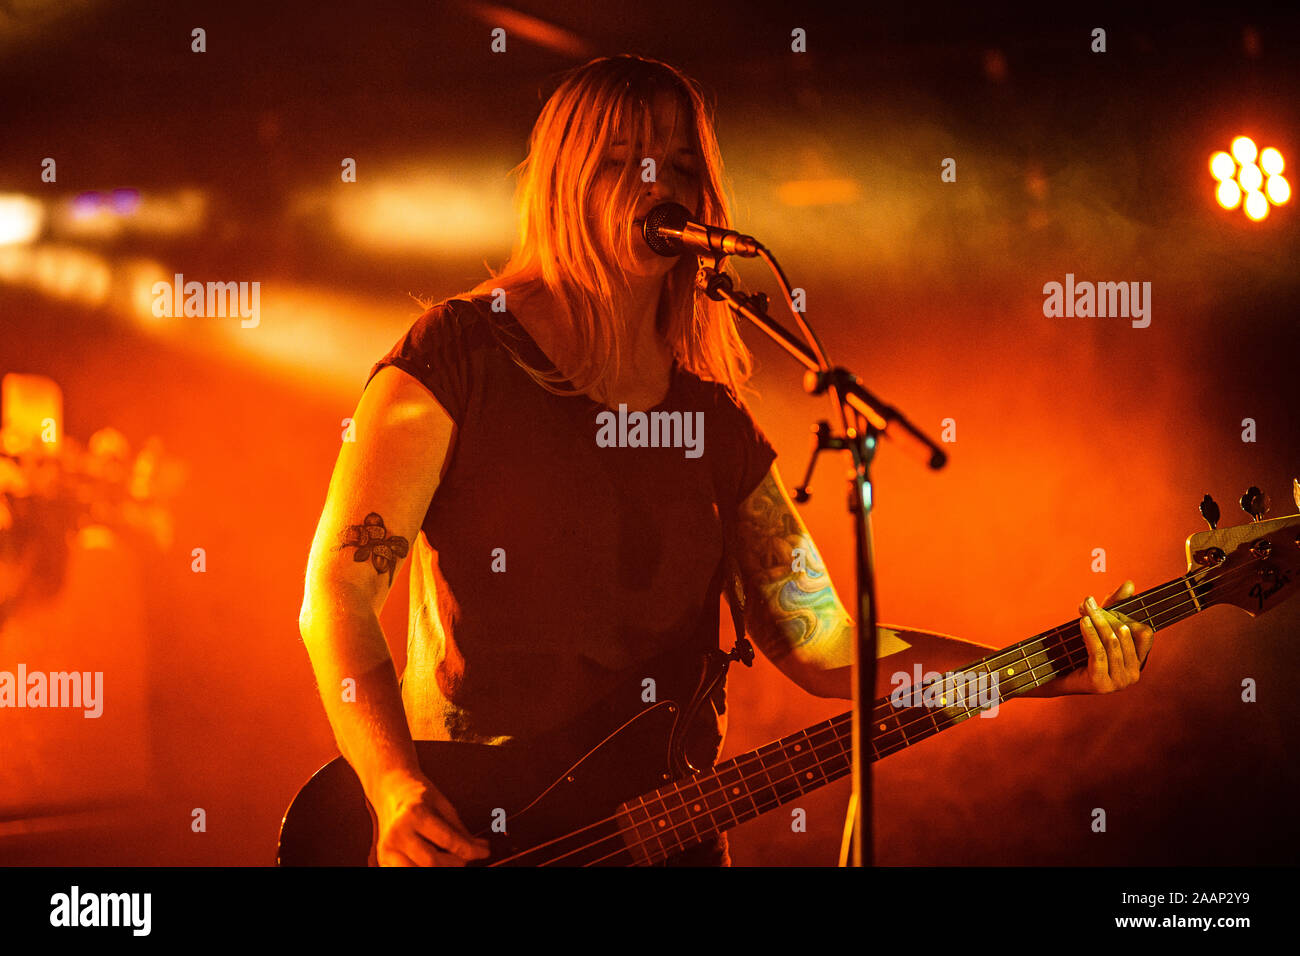 Copenhagen, Denmark. 21st, November 2019. The Swiss metal band E-L-R performs a live concert at Stengade in Copenhagen. Here vocalist and bass player I.R. is seen live on stage. (Photo credit: Gonzales Photo - Peter Troest). Stock Photo